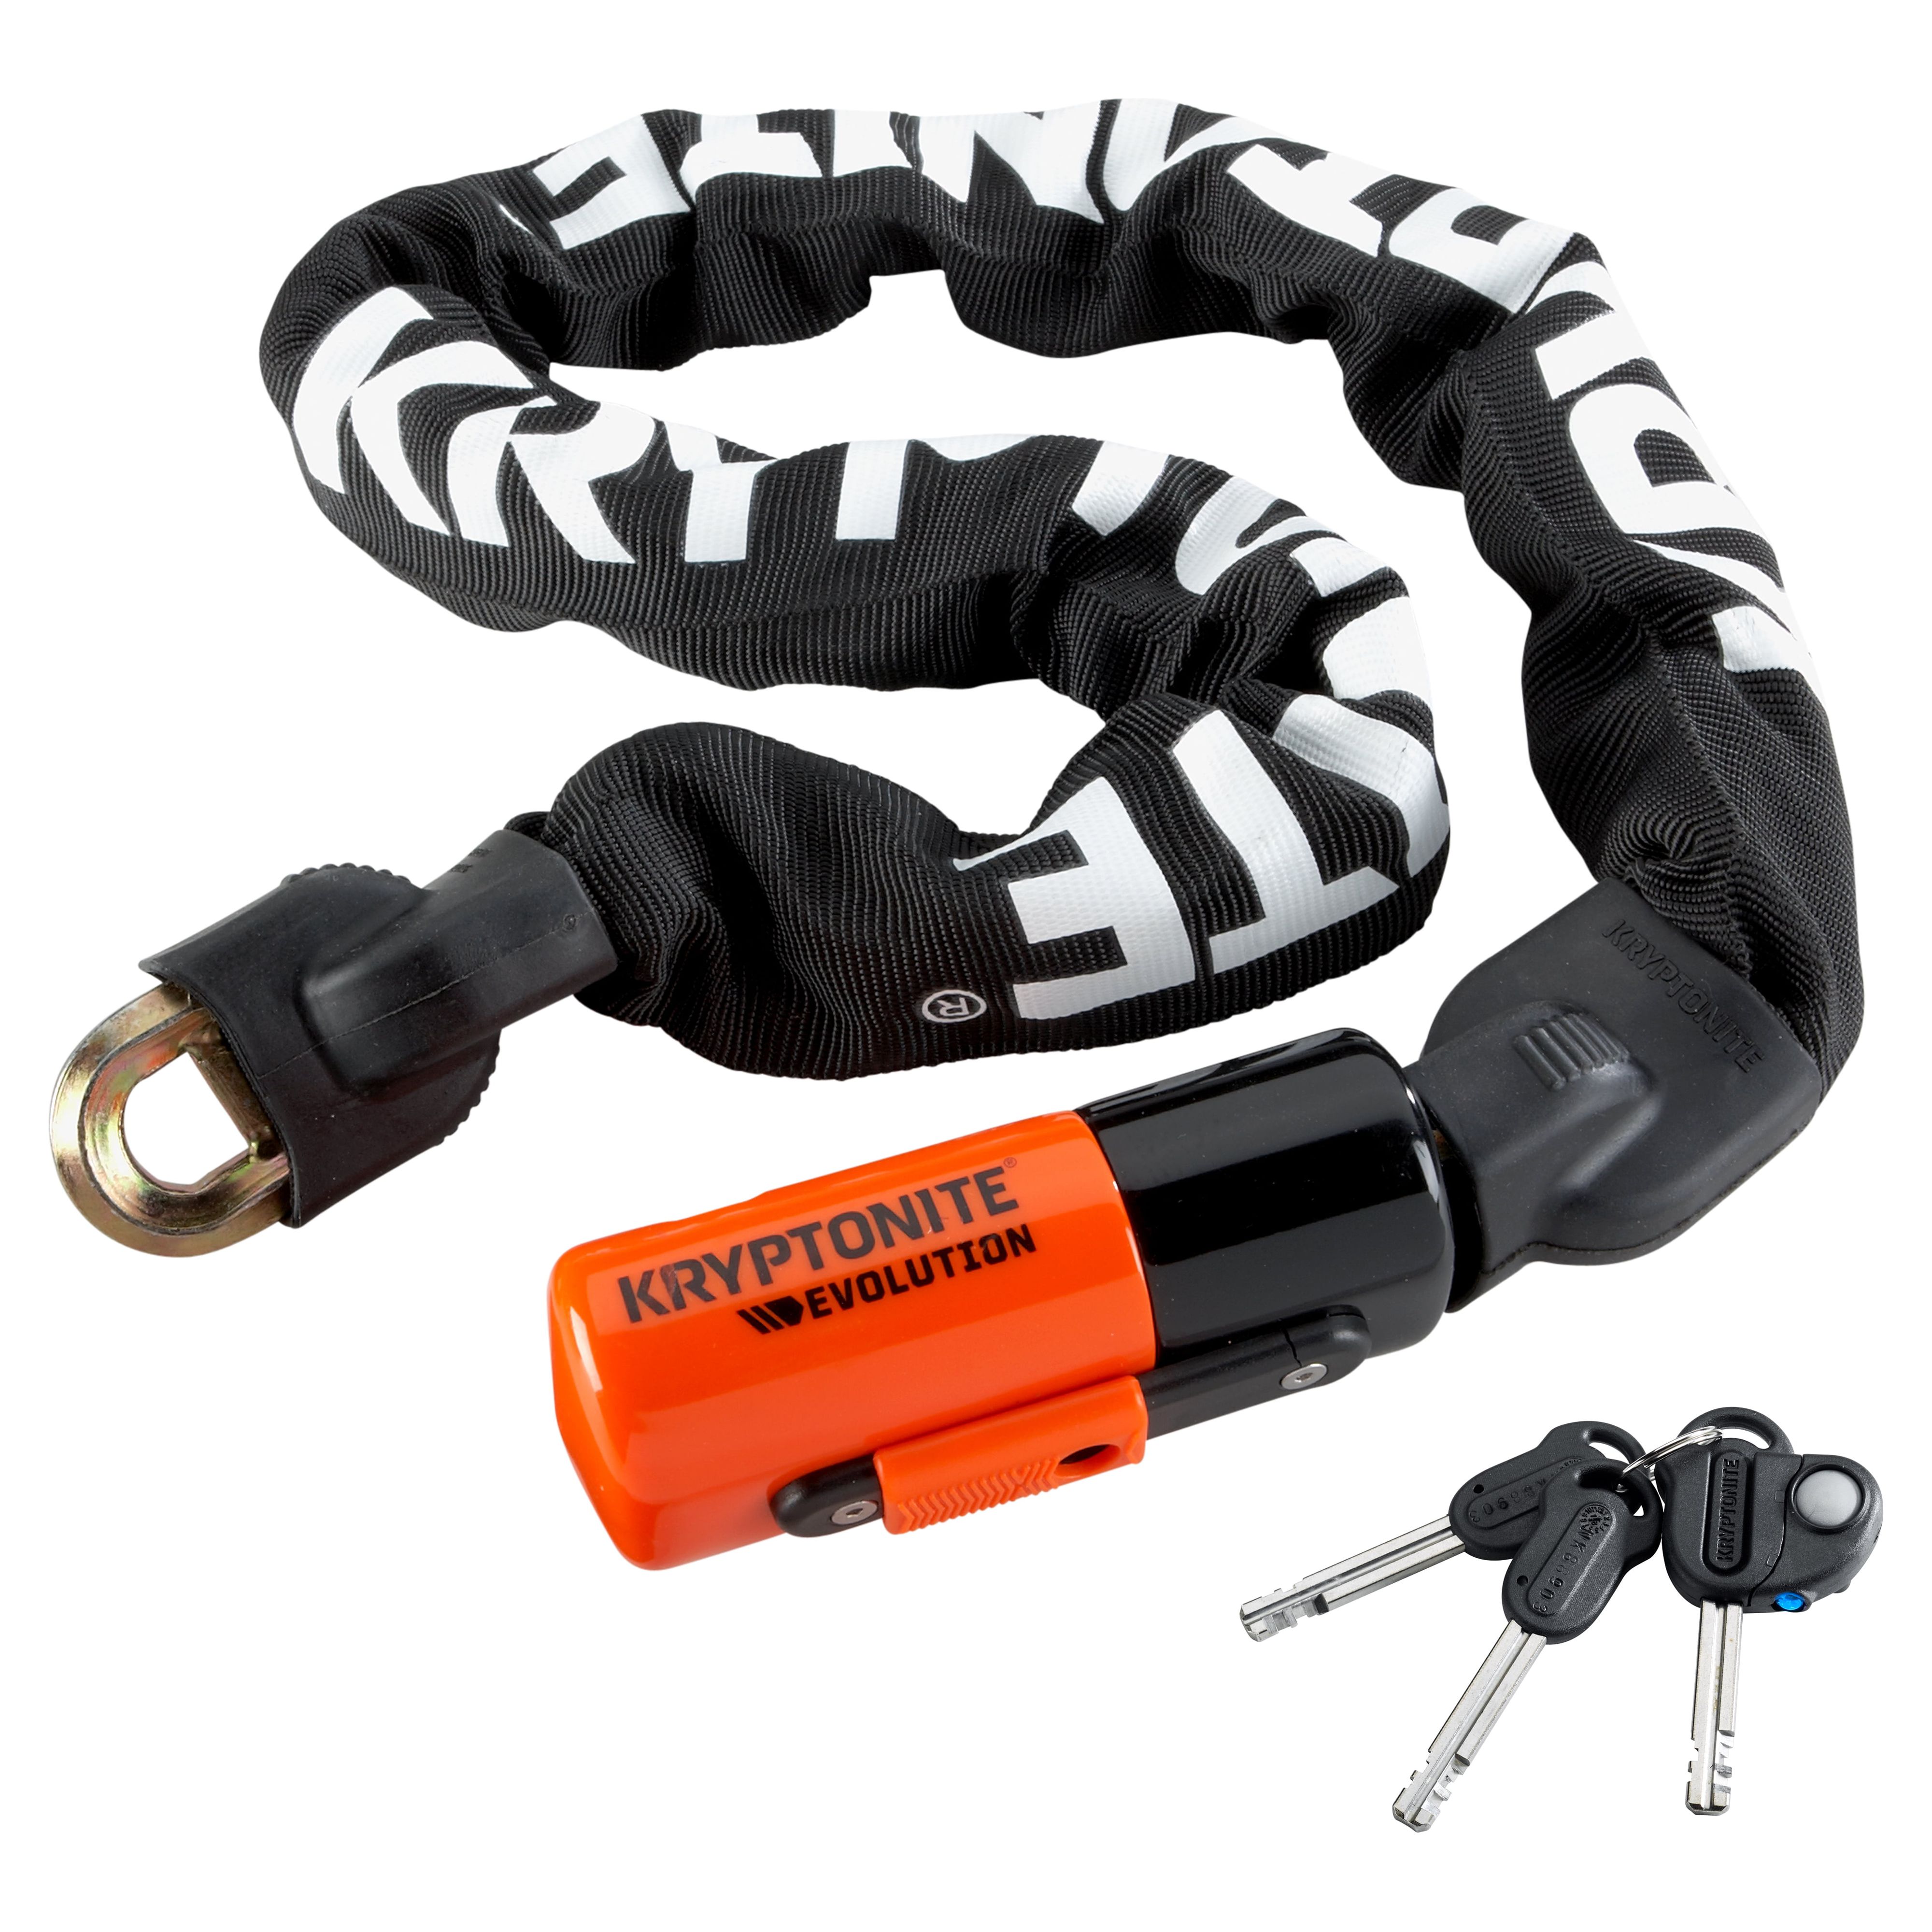 Kryptonite Evolution Series 4 1090 Integrated Chain Bicycle Lock - image 1 of 9